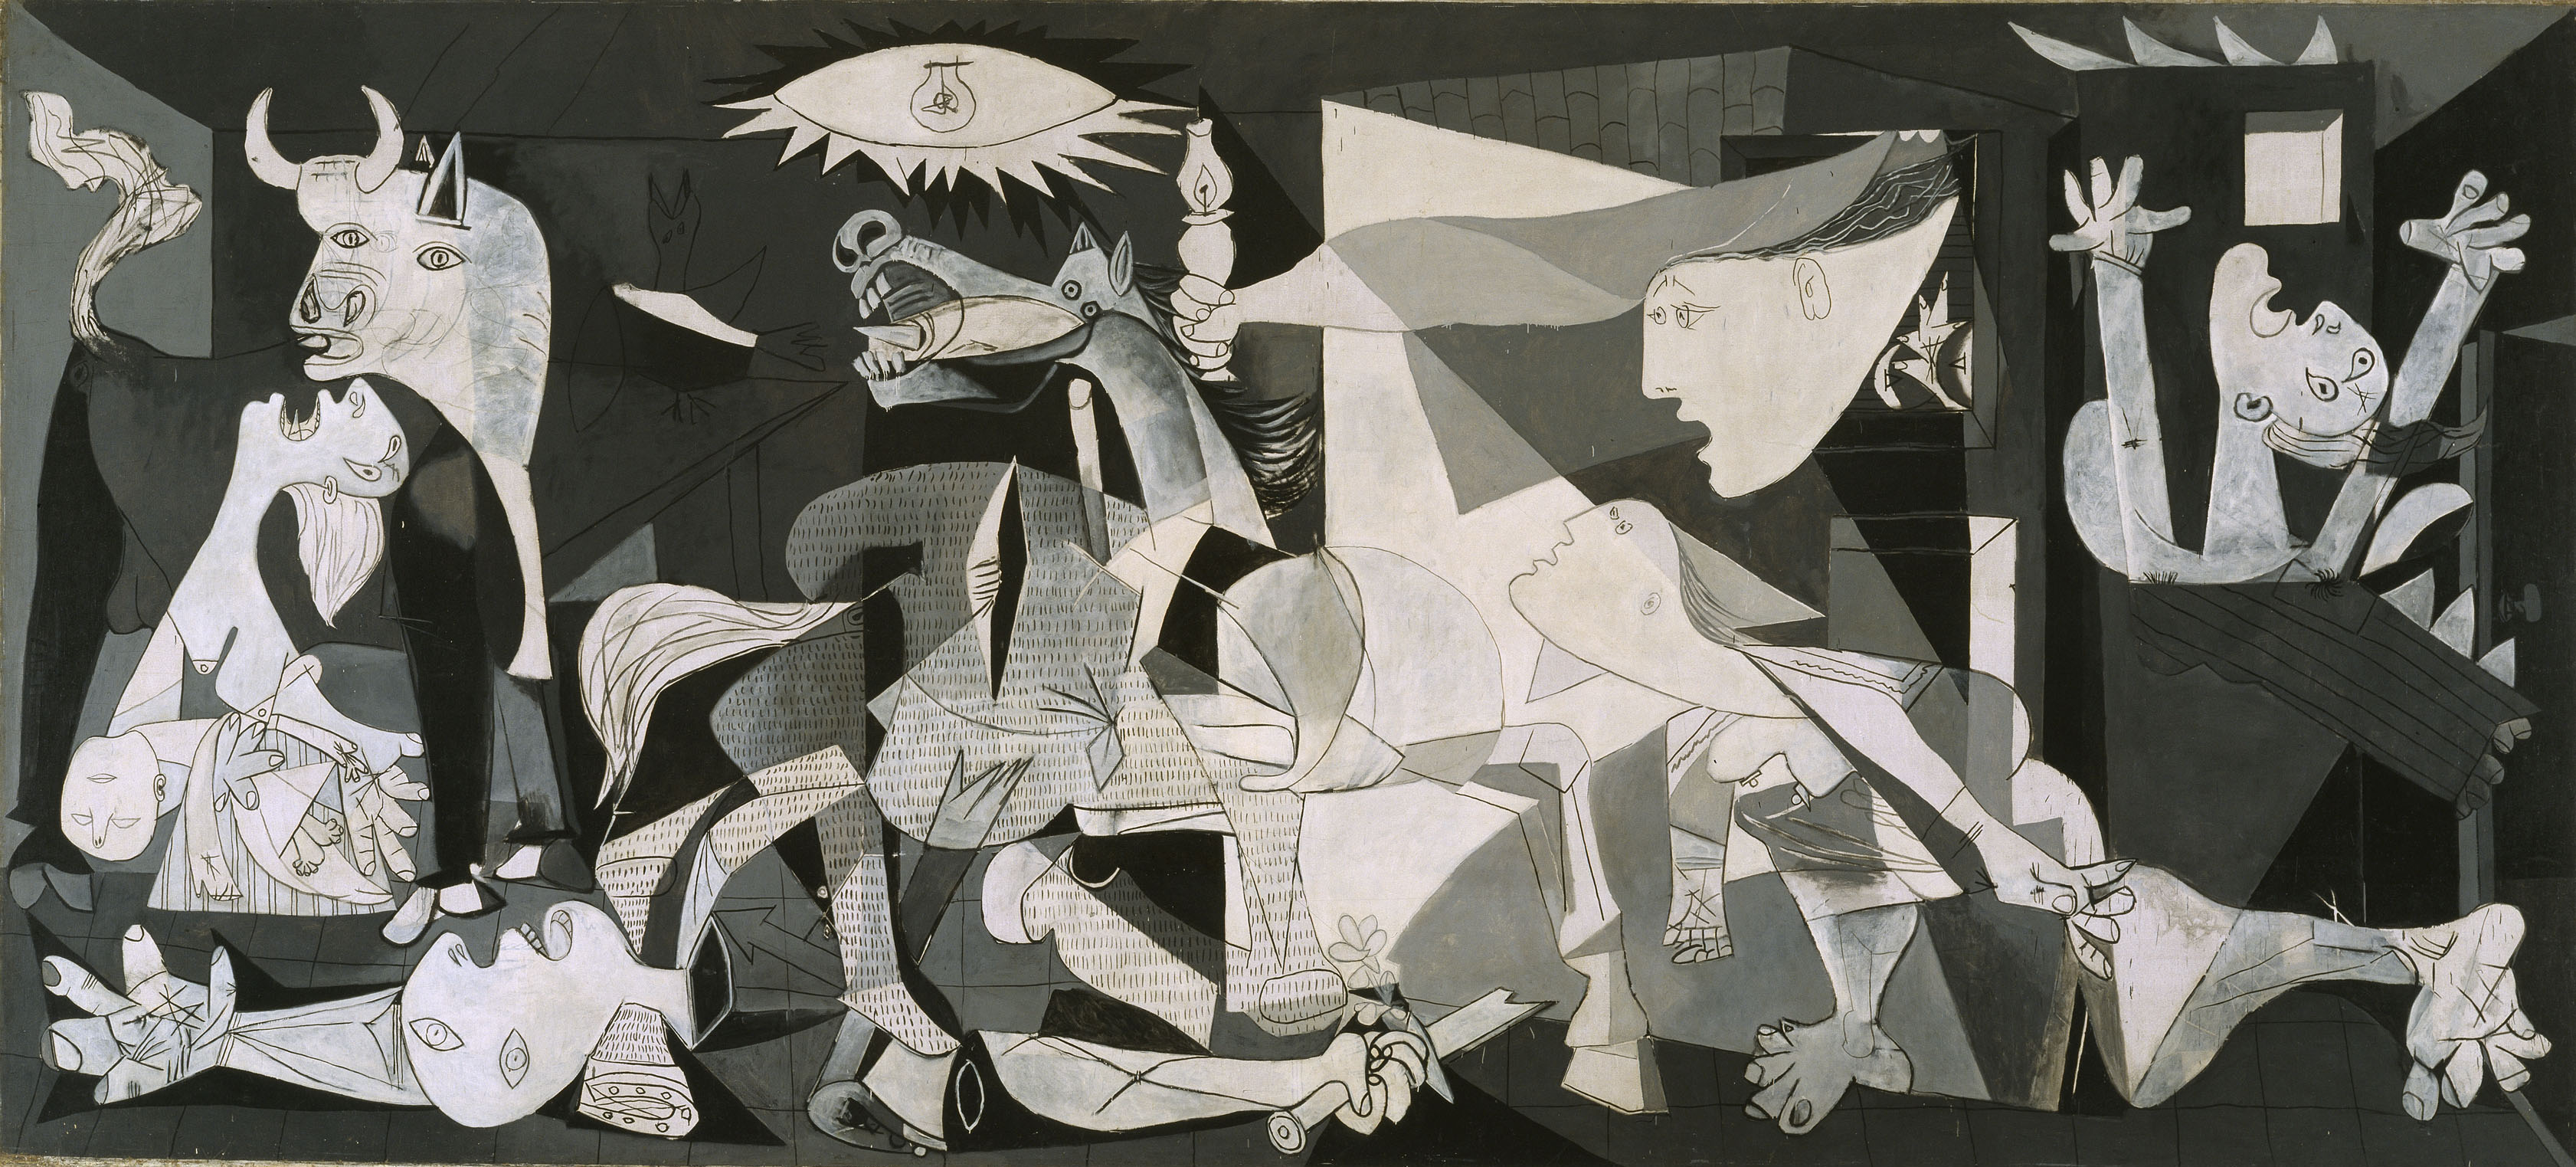 What is the meaning behind Pablo Picasso's art?